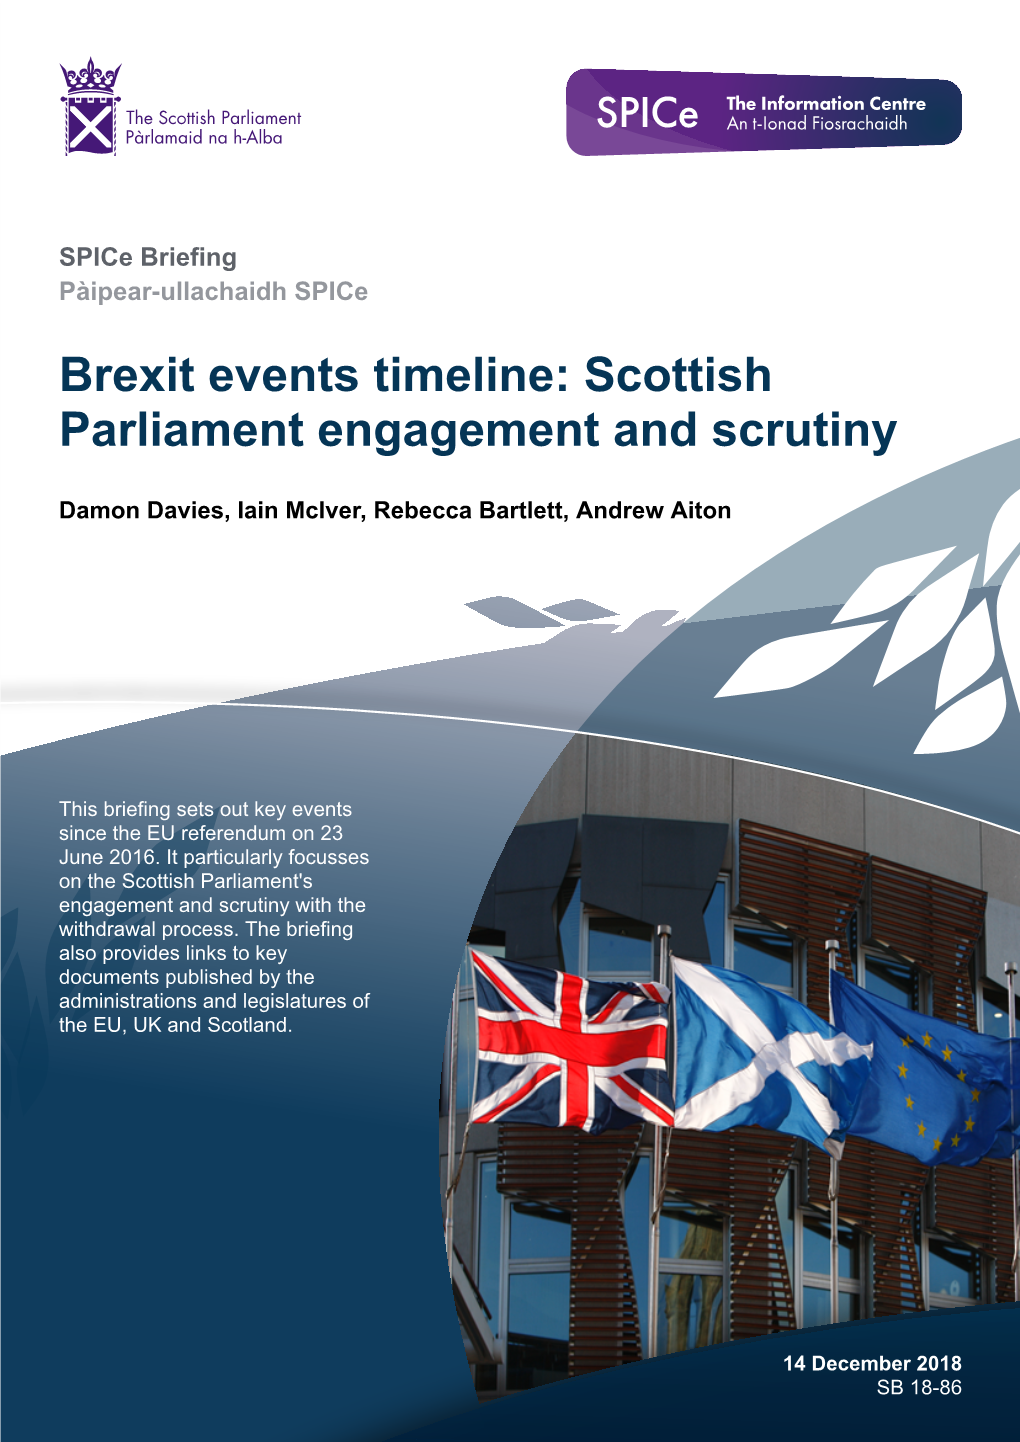 Brexit Events Timeline: Scottish Parliament Engagement and Scrutiny